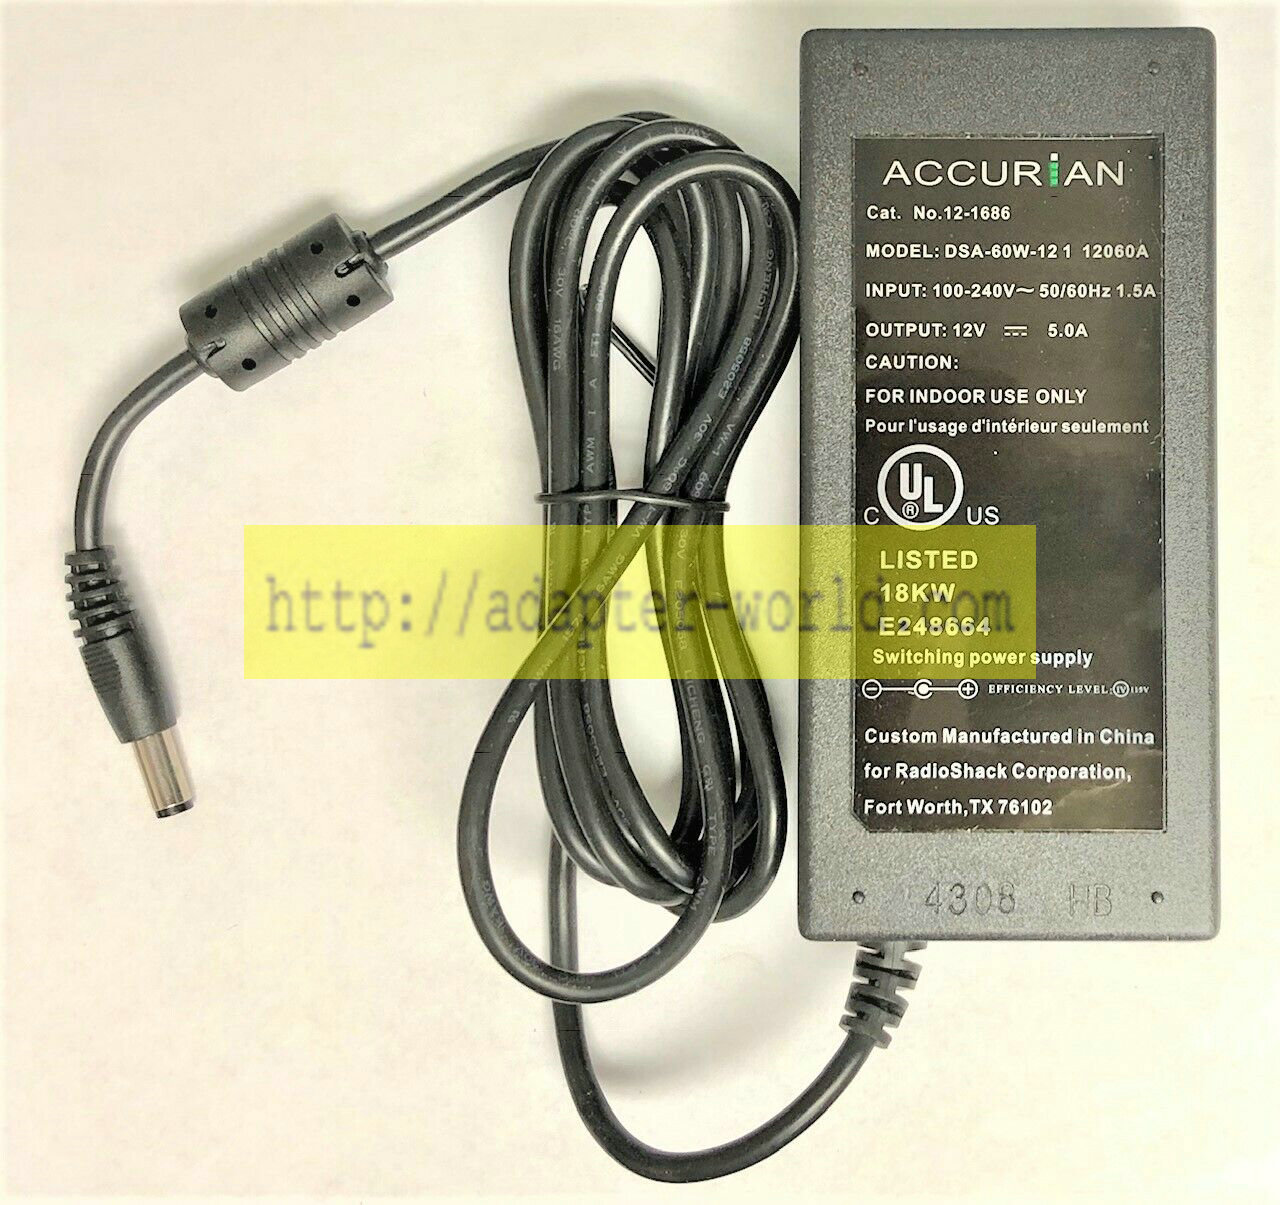 *Brand NEW*ACCURIAN DSA-60W-12 1 12060A 12-1686 12V 5.0A AC DC Adapter POWER SUPPLY